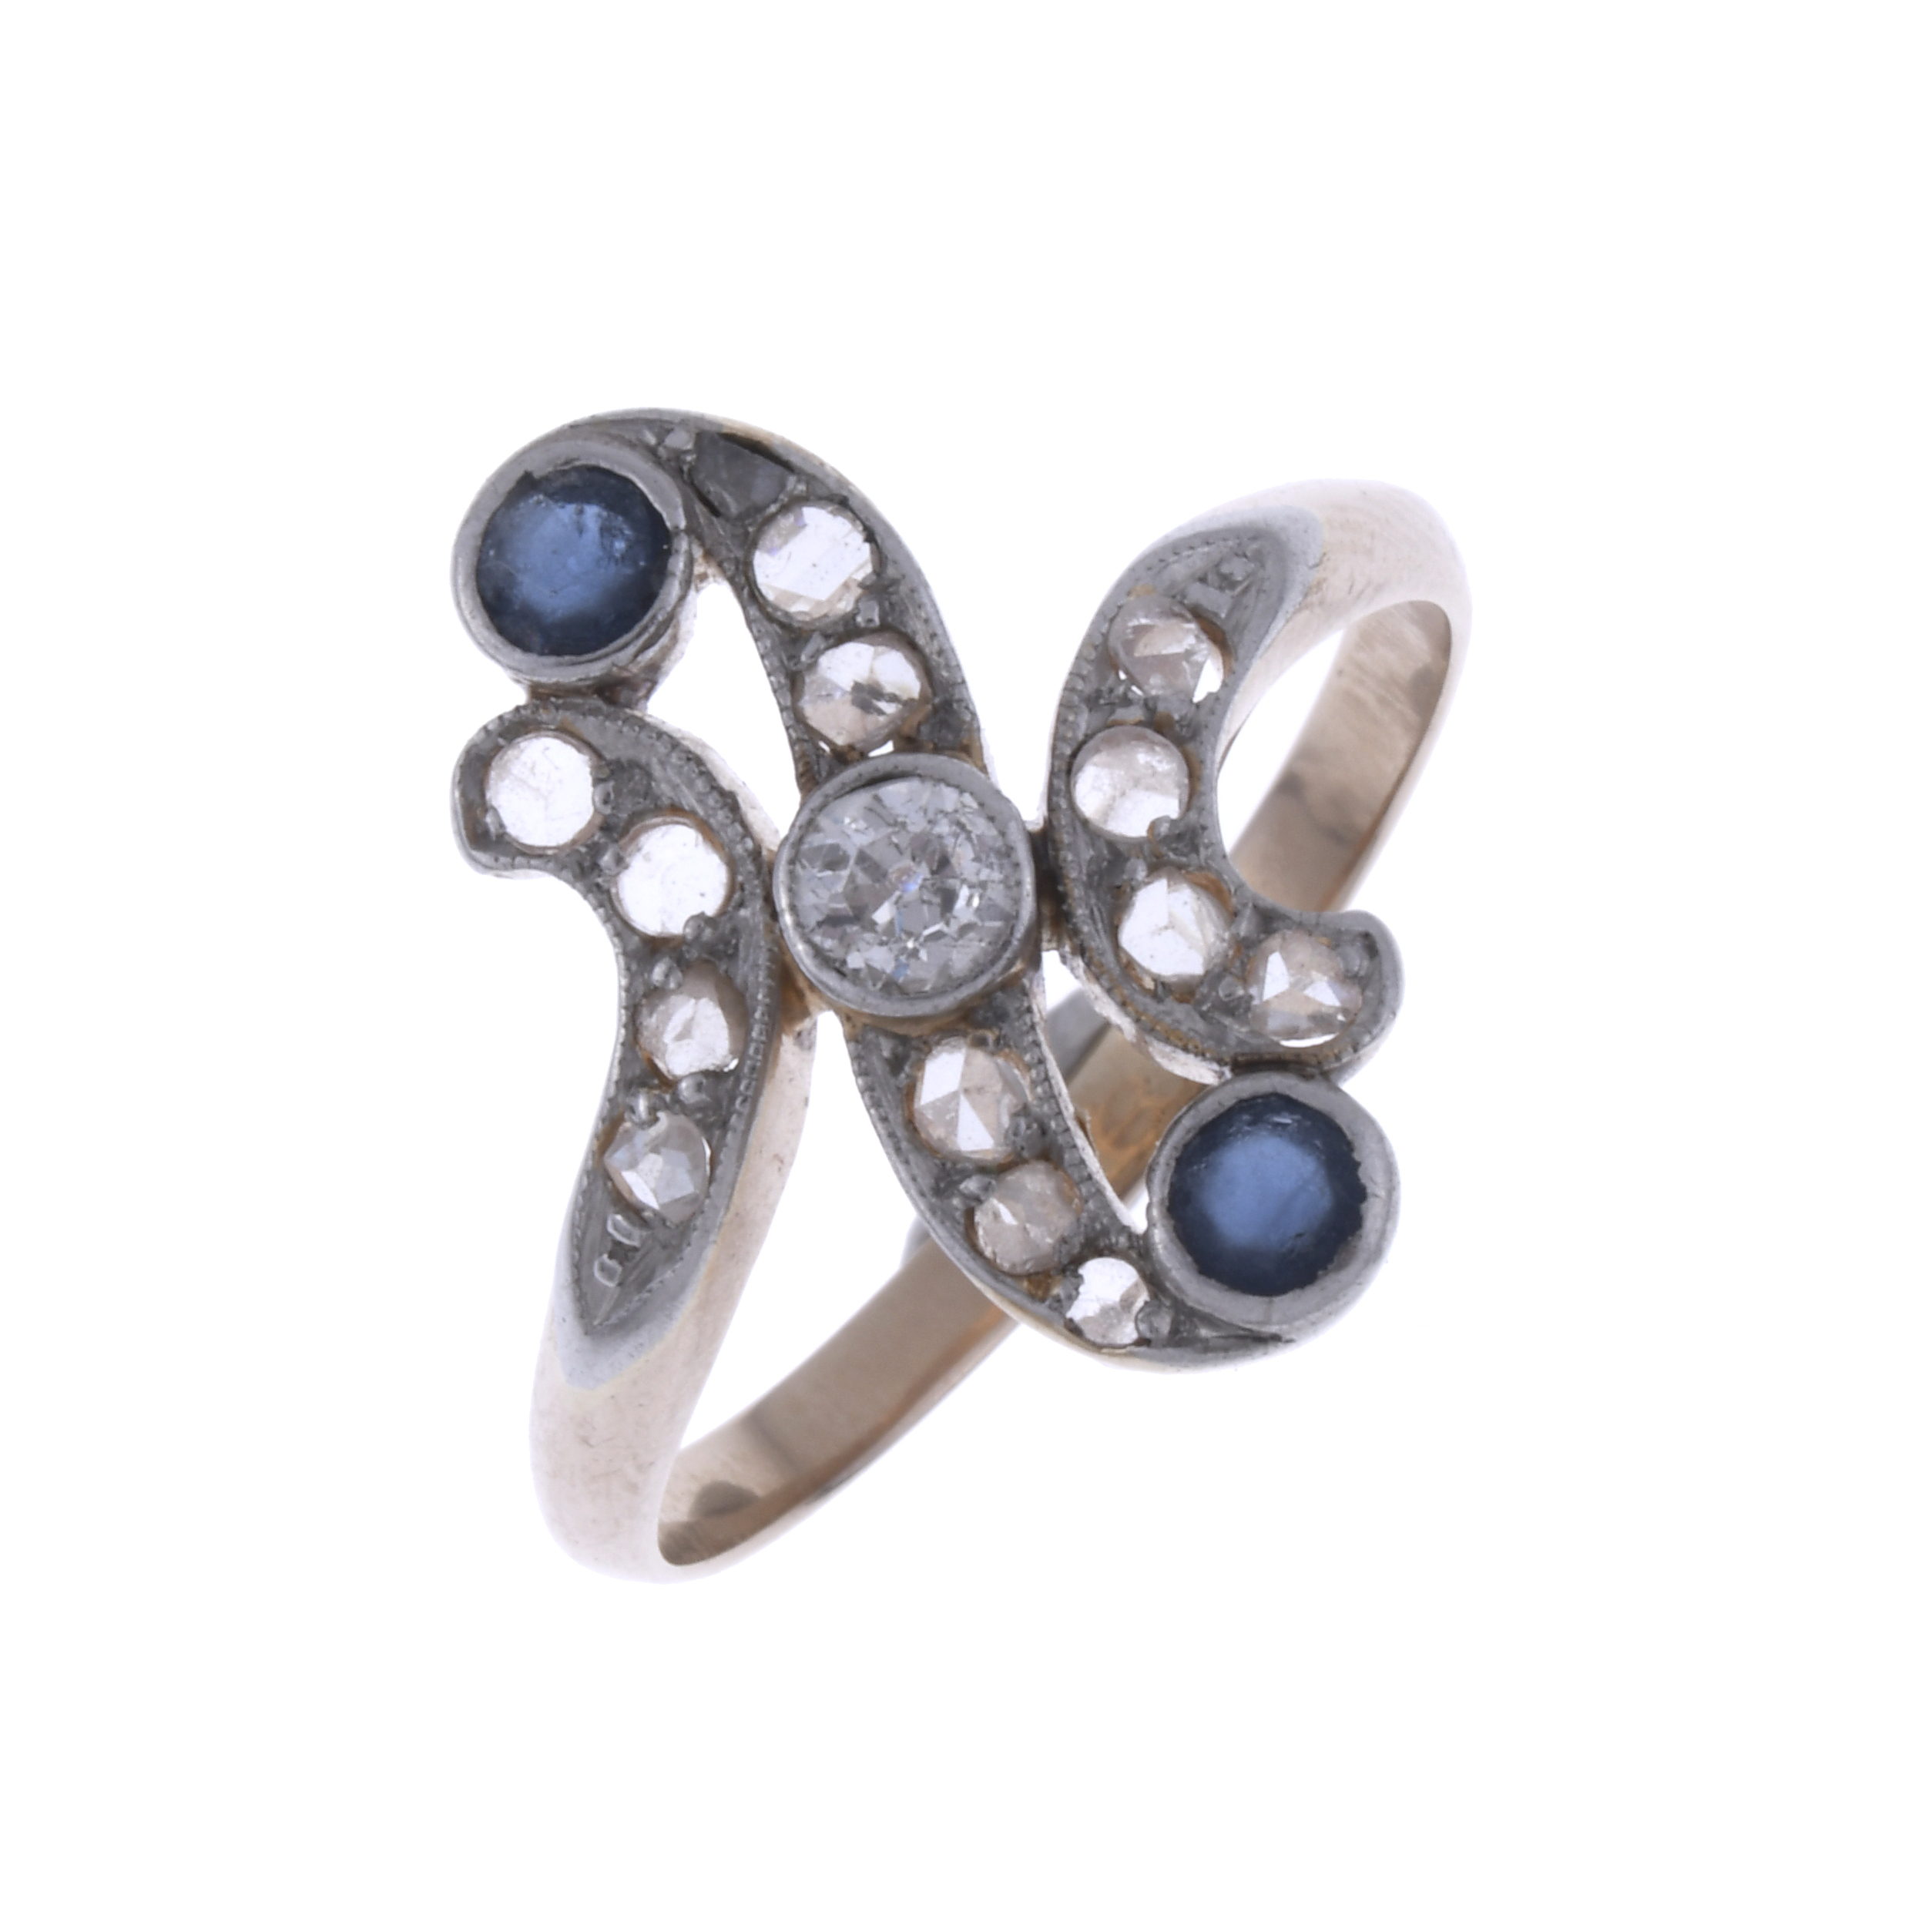 ART NOUVEAU RING WITH DIAMONDS AND SAPPHIRE.